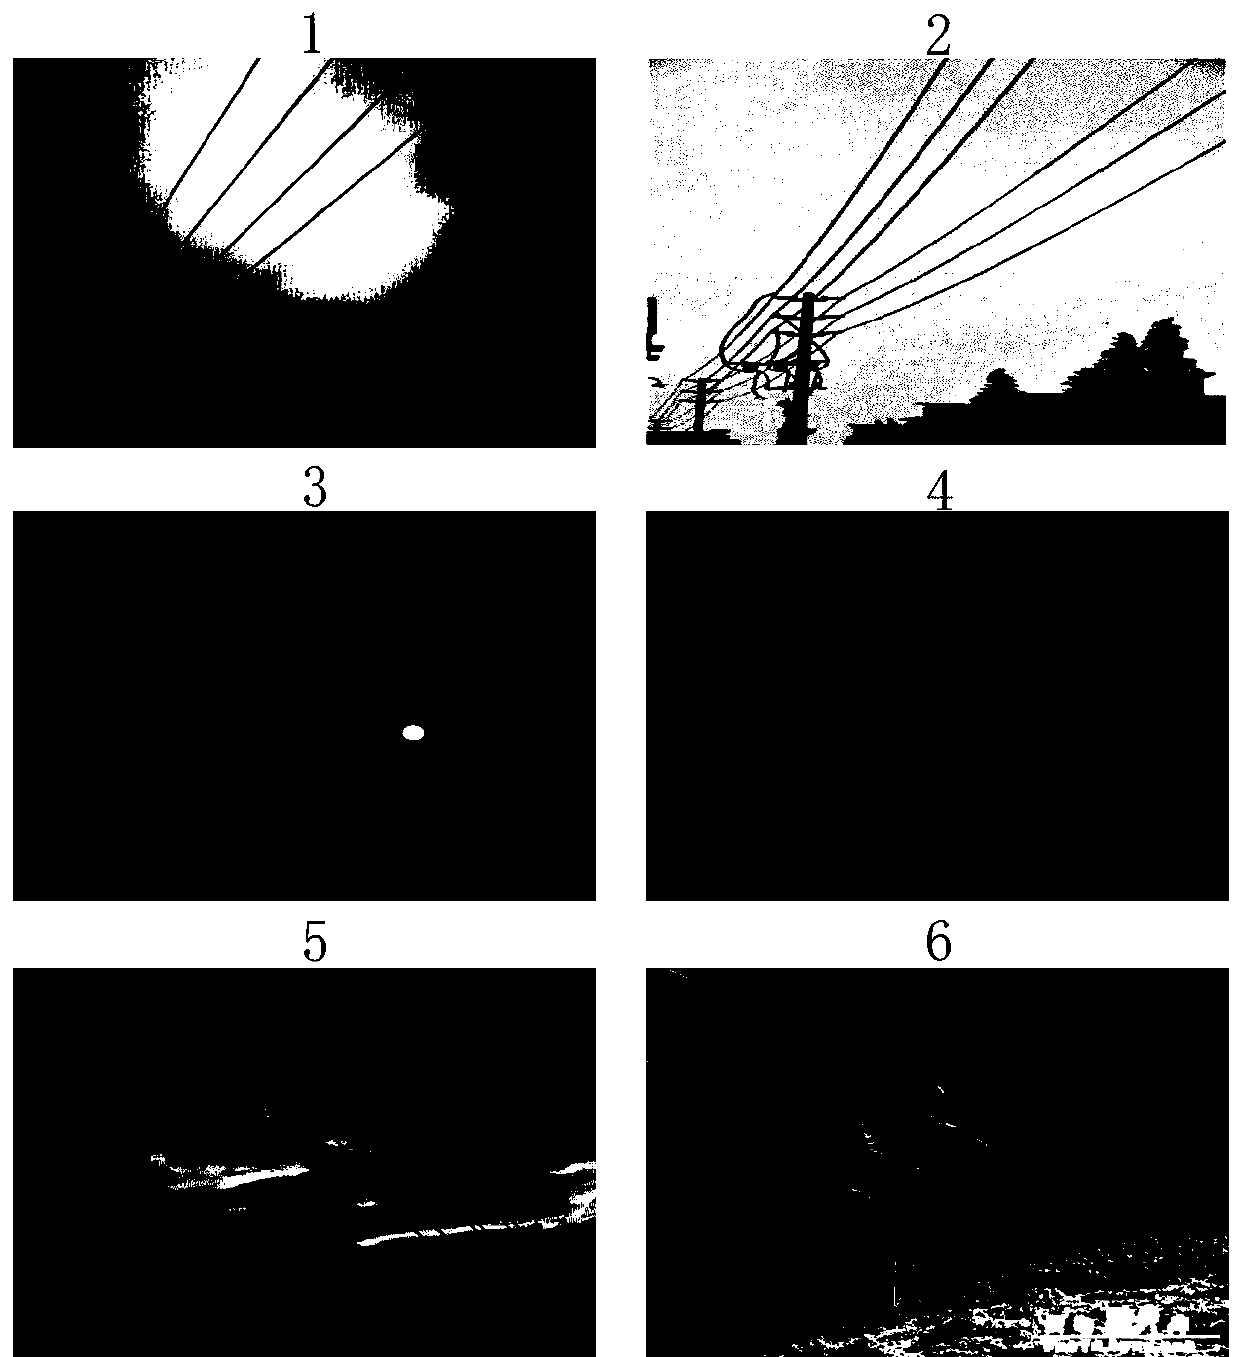 Method for electric transmission line image processing under complicated background based on image classification